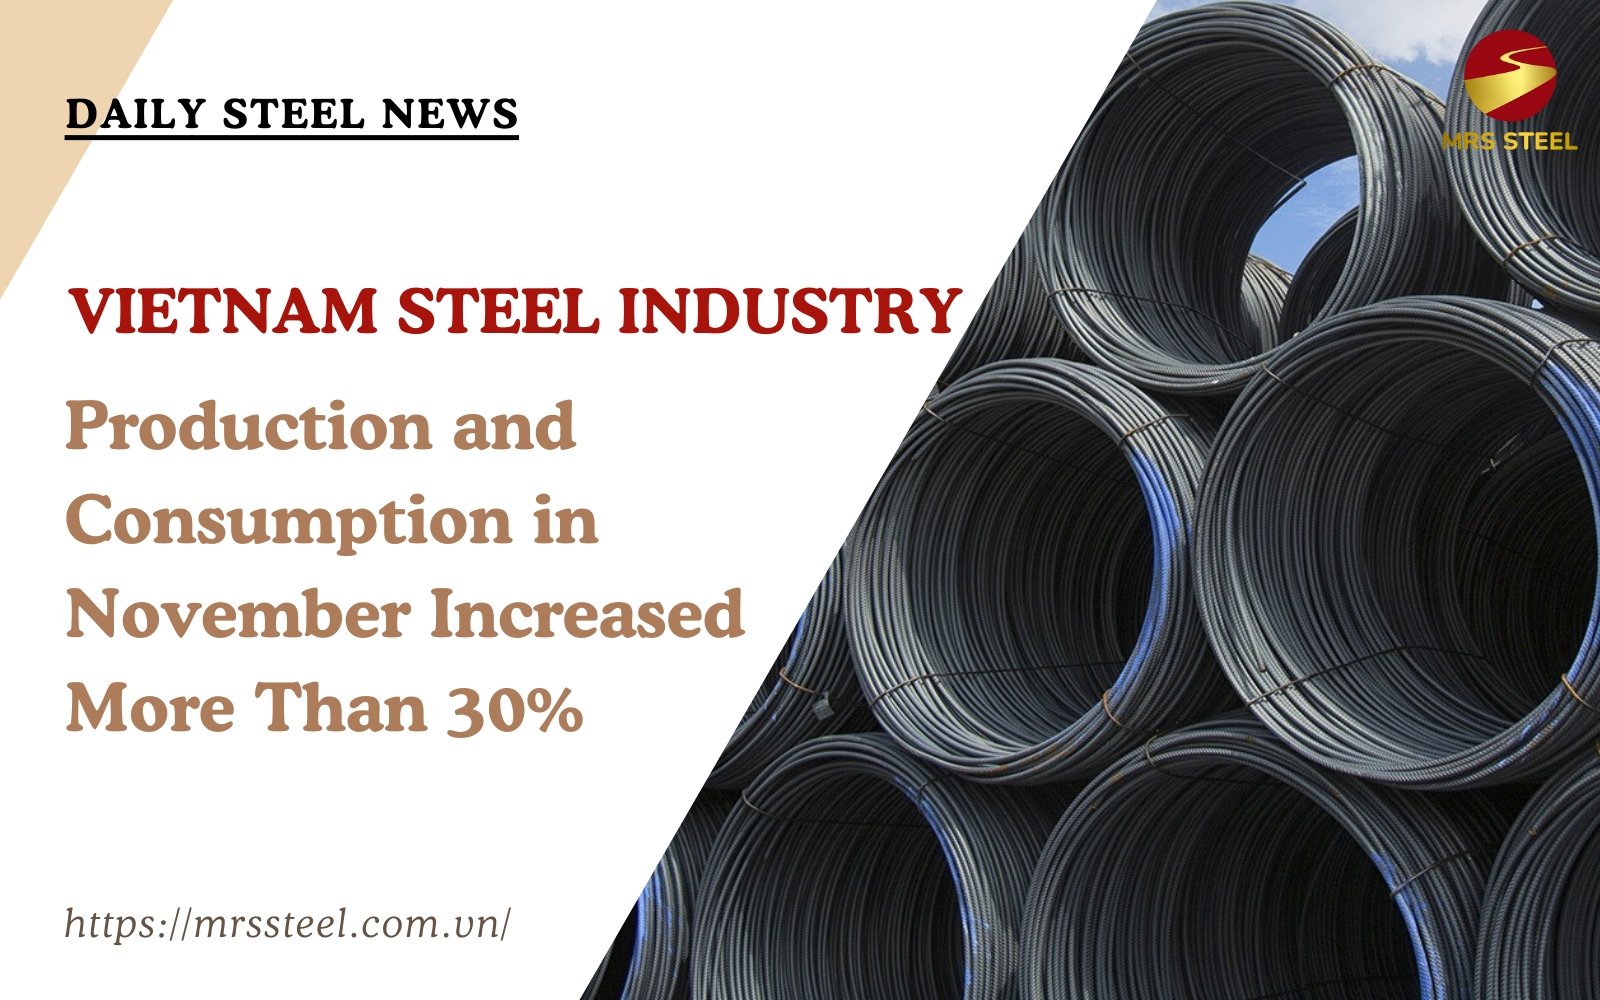 Steel Industry: Production and Consumption in November Increased More Than 30%